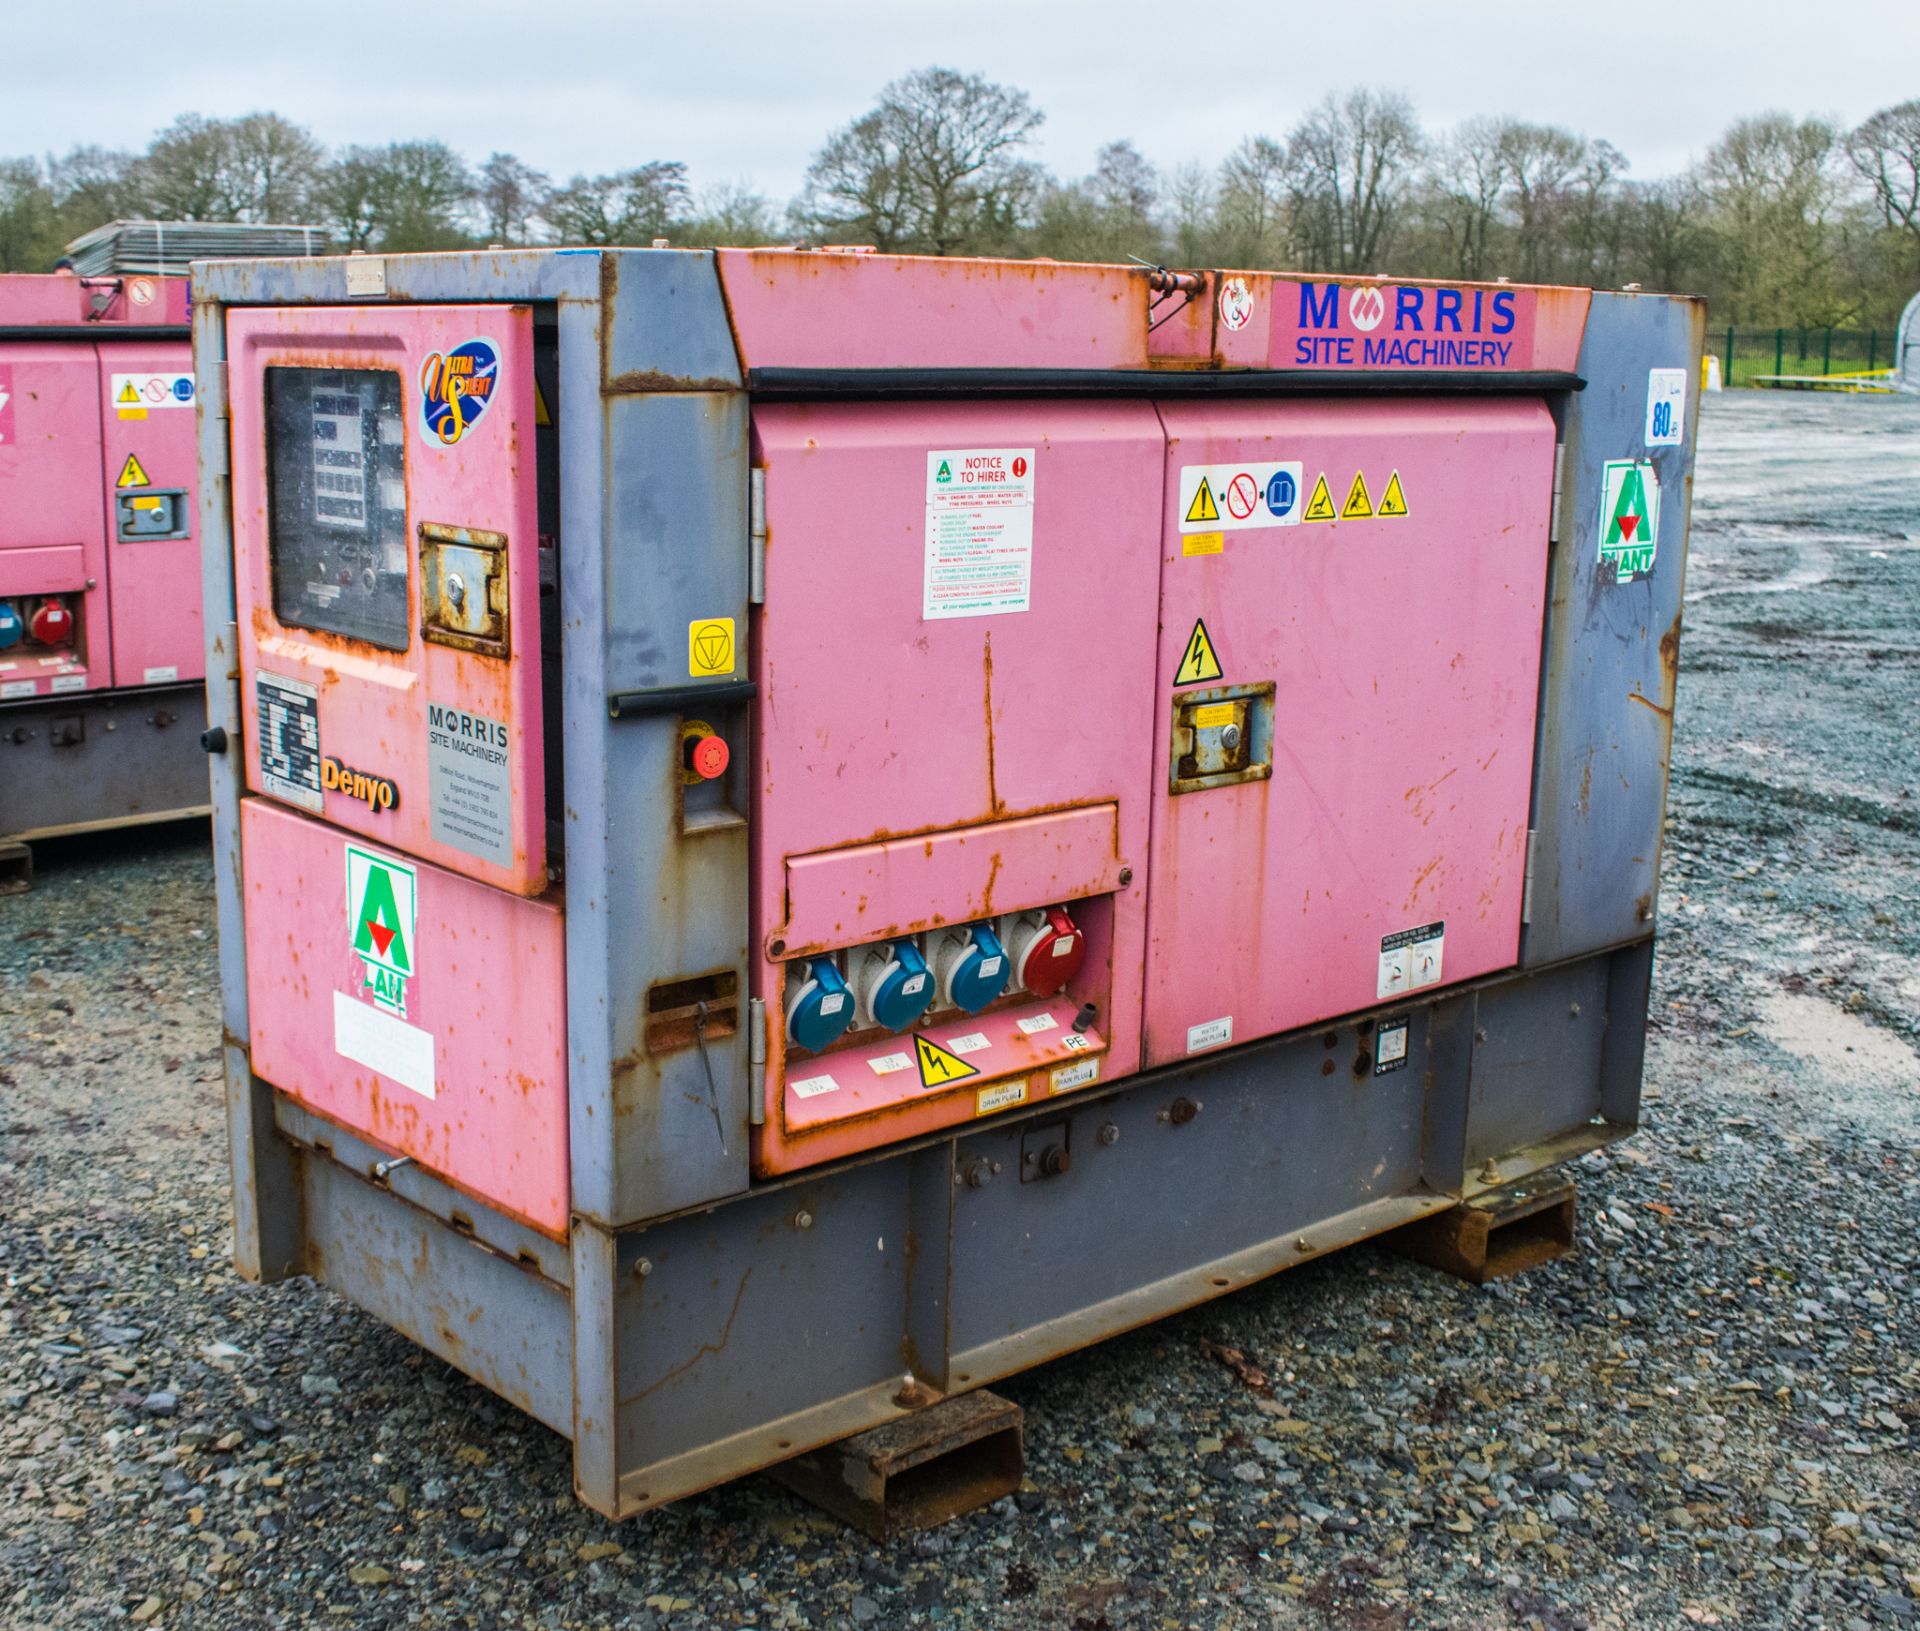 Denyo 25 USE 25 kva diesel driven generator Year: 2012 S/N: 3861358 Recorded Hours: 8891 A628529